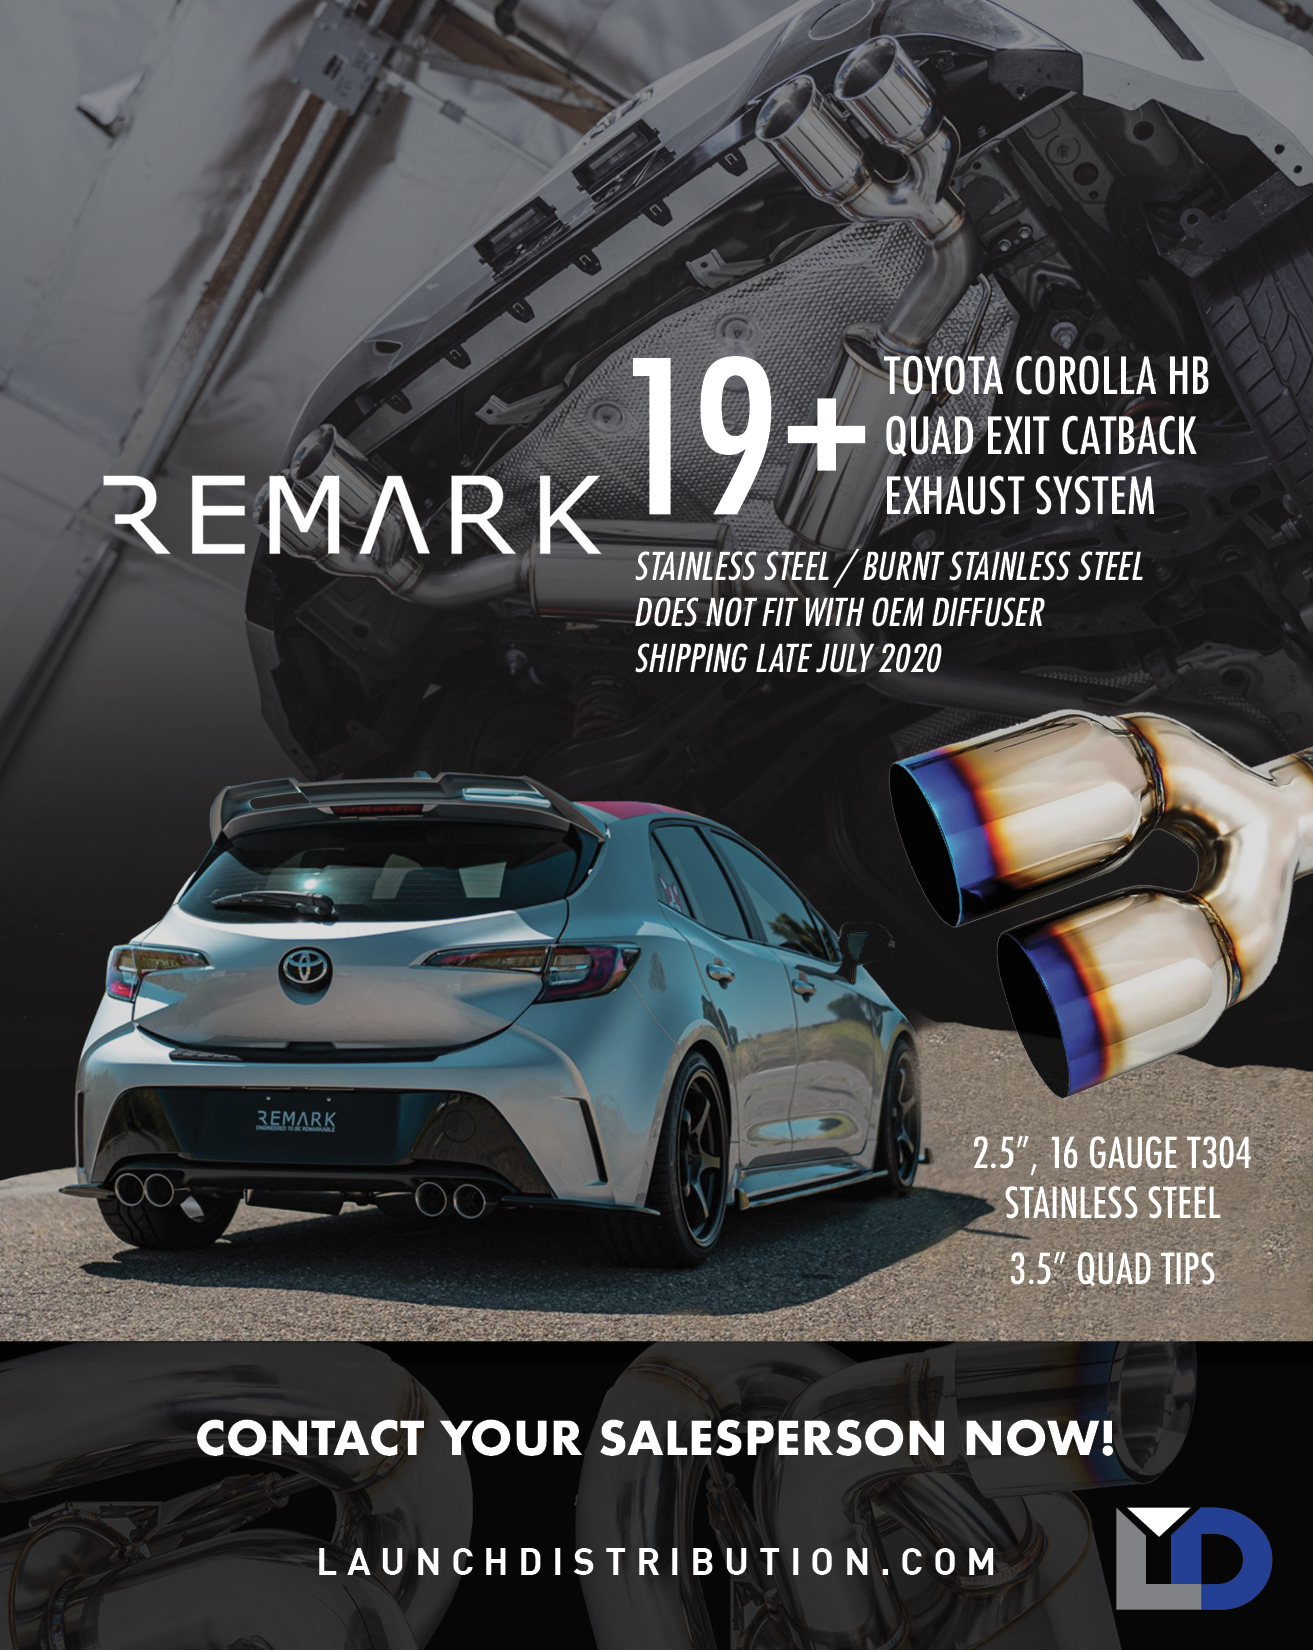 Pre-Order NOW – 2019 Toyota Corolla HB Cat-Back Exhaust Kit with Quad Tips by REMARK